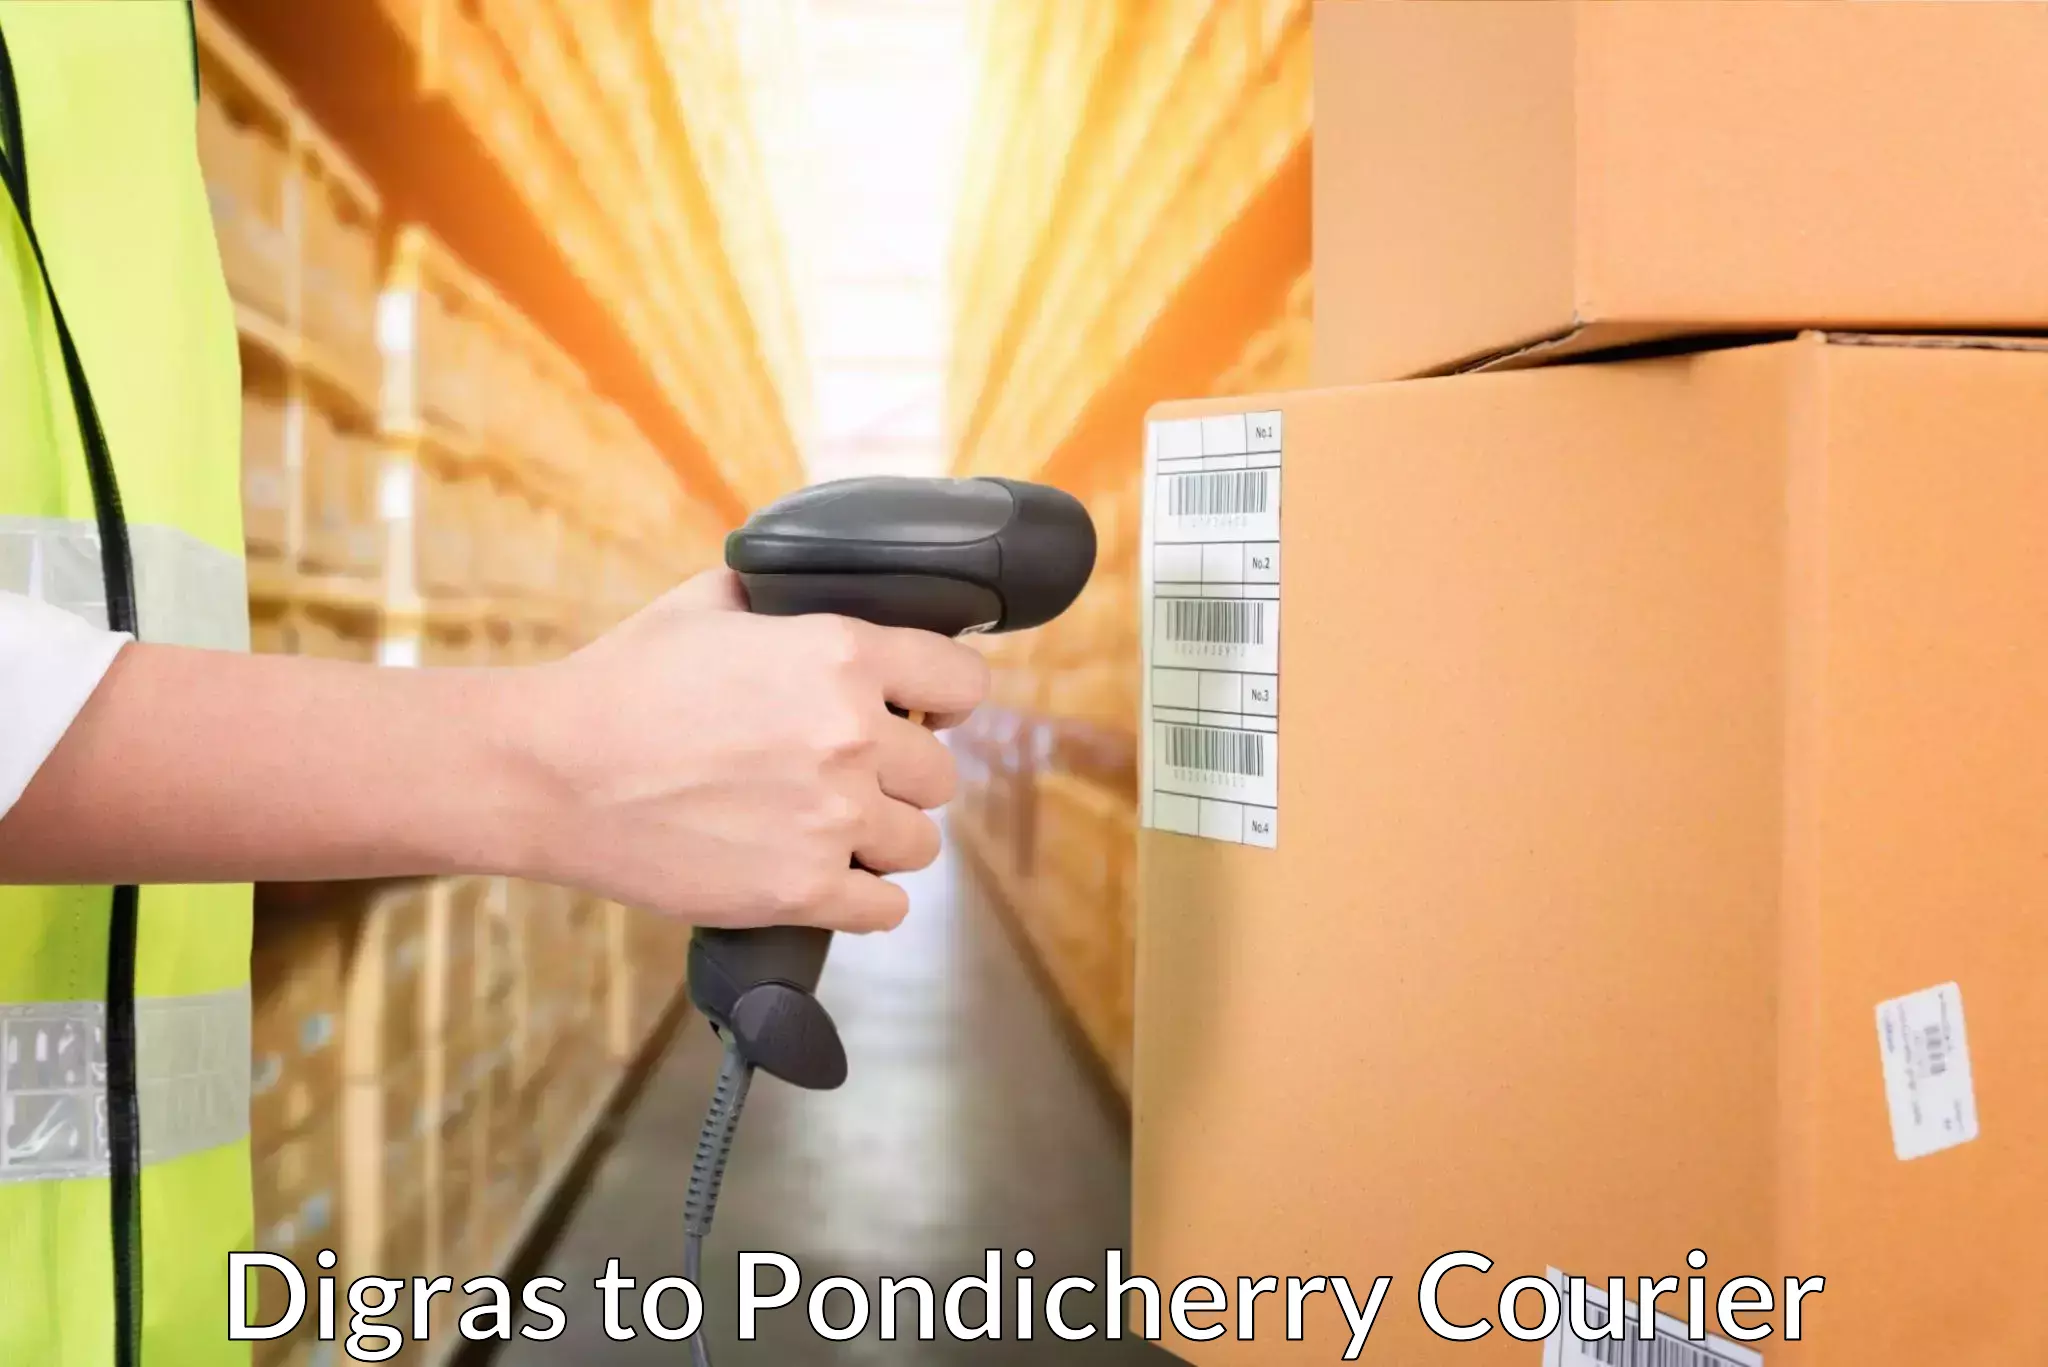 Professional courier handling Digras to Pondicherry